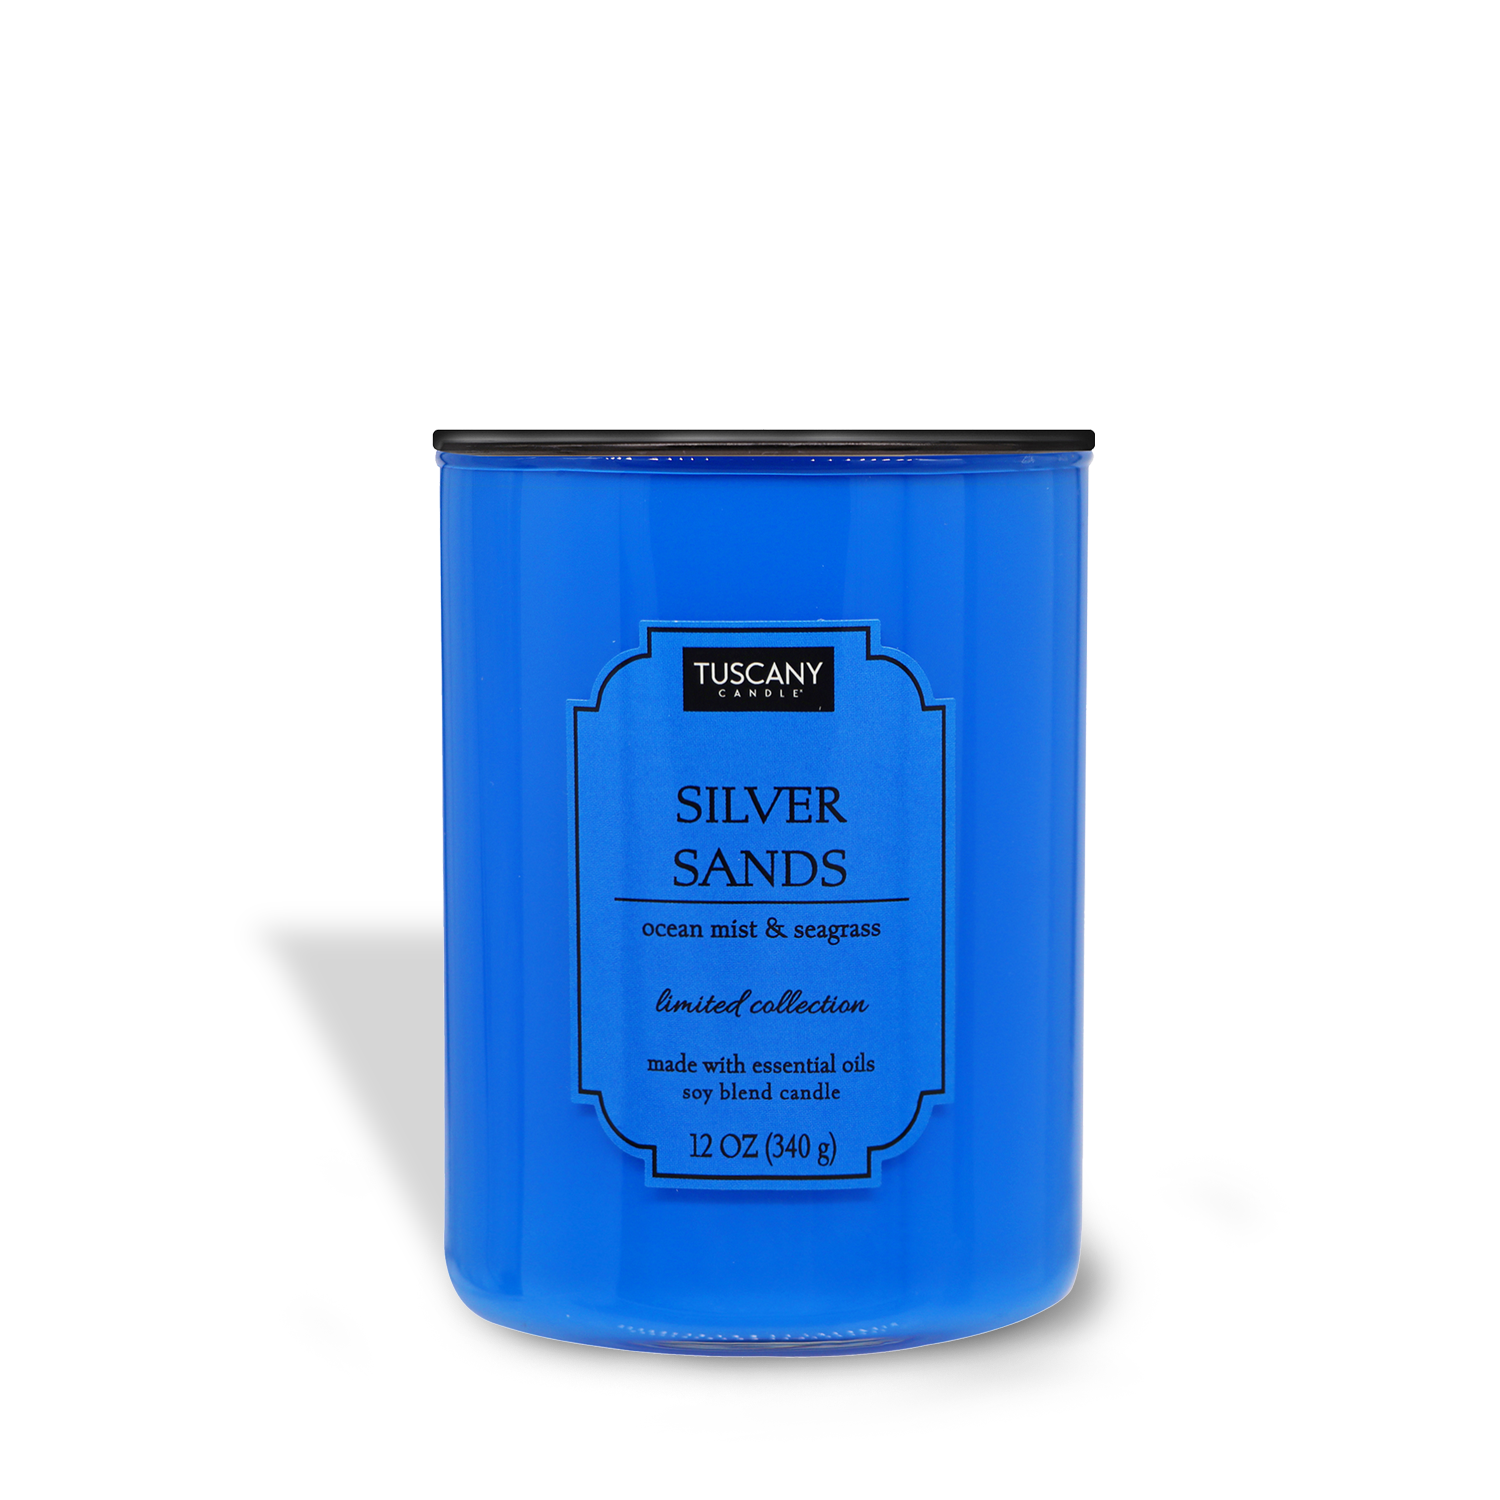 Blue Silver Sands candle in a cylindrical container labeled "Silver Sands (12 oz) – Colorsplash Collection" with ocean mist & seagrass scent description by Tuscany Candle® EVD.